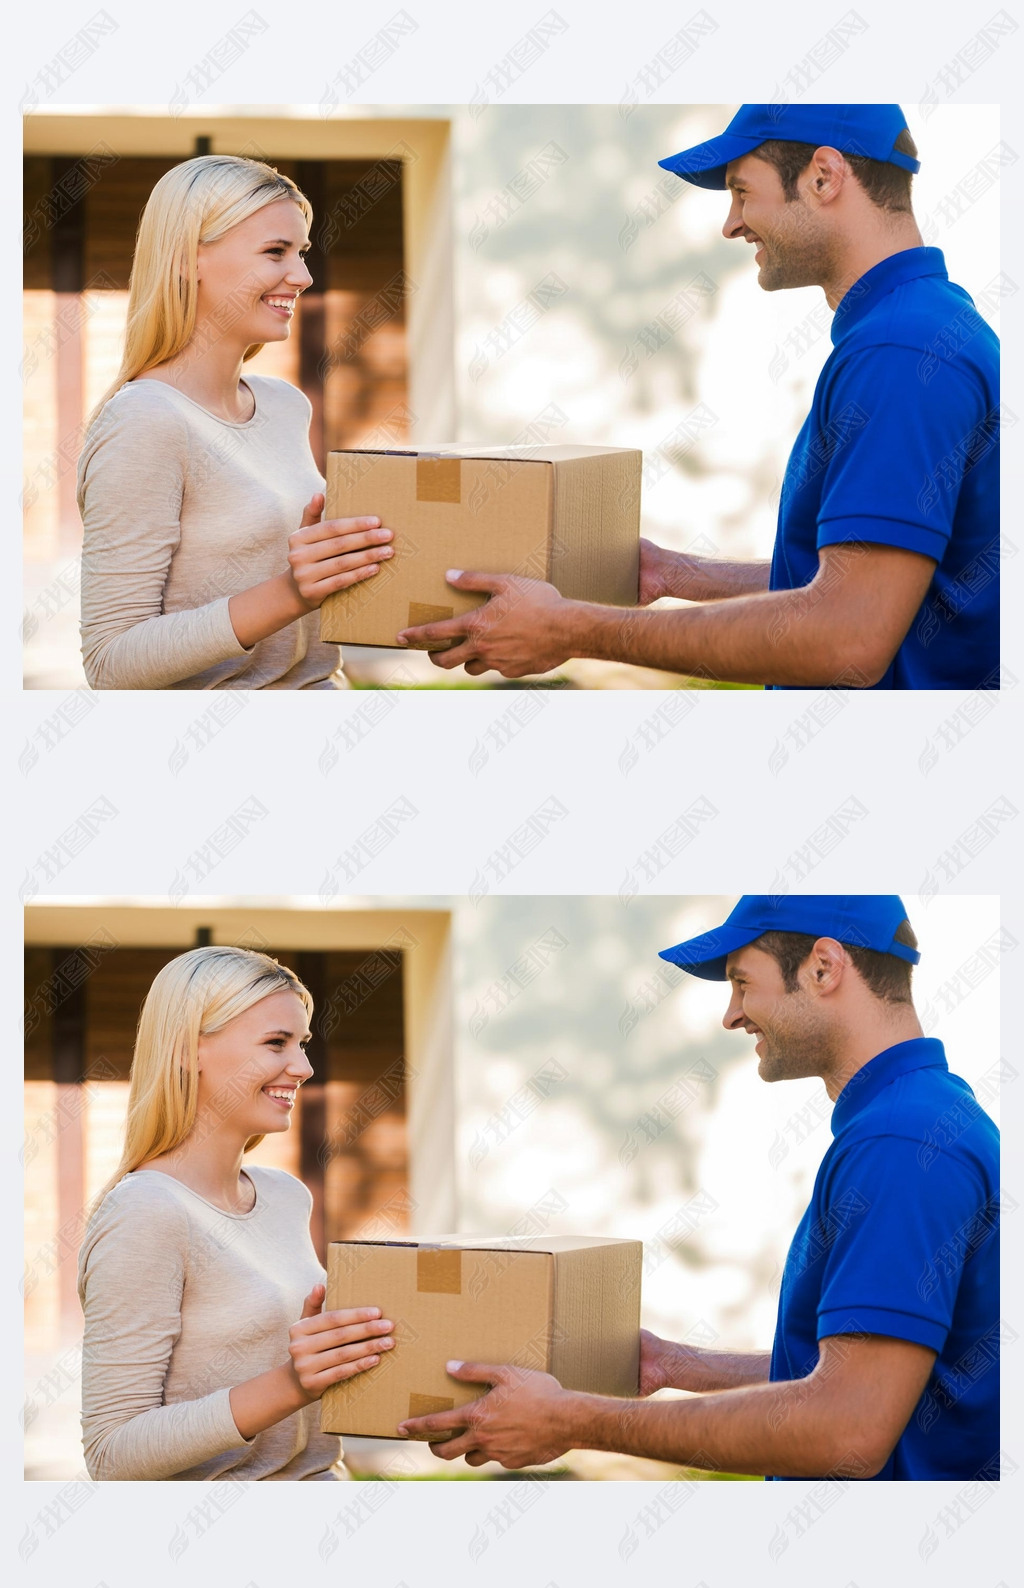 delivery man giving a cardboard box to woman